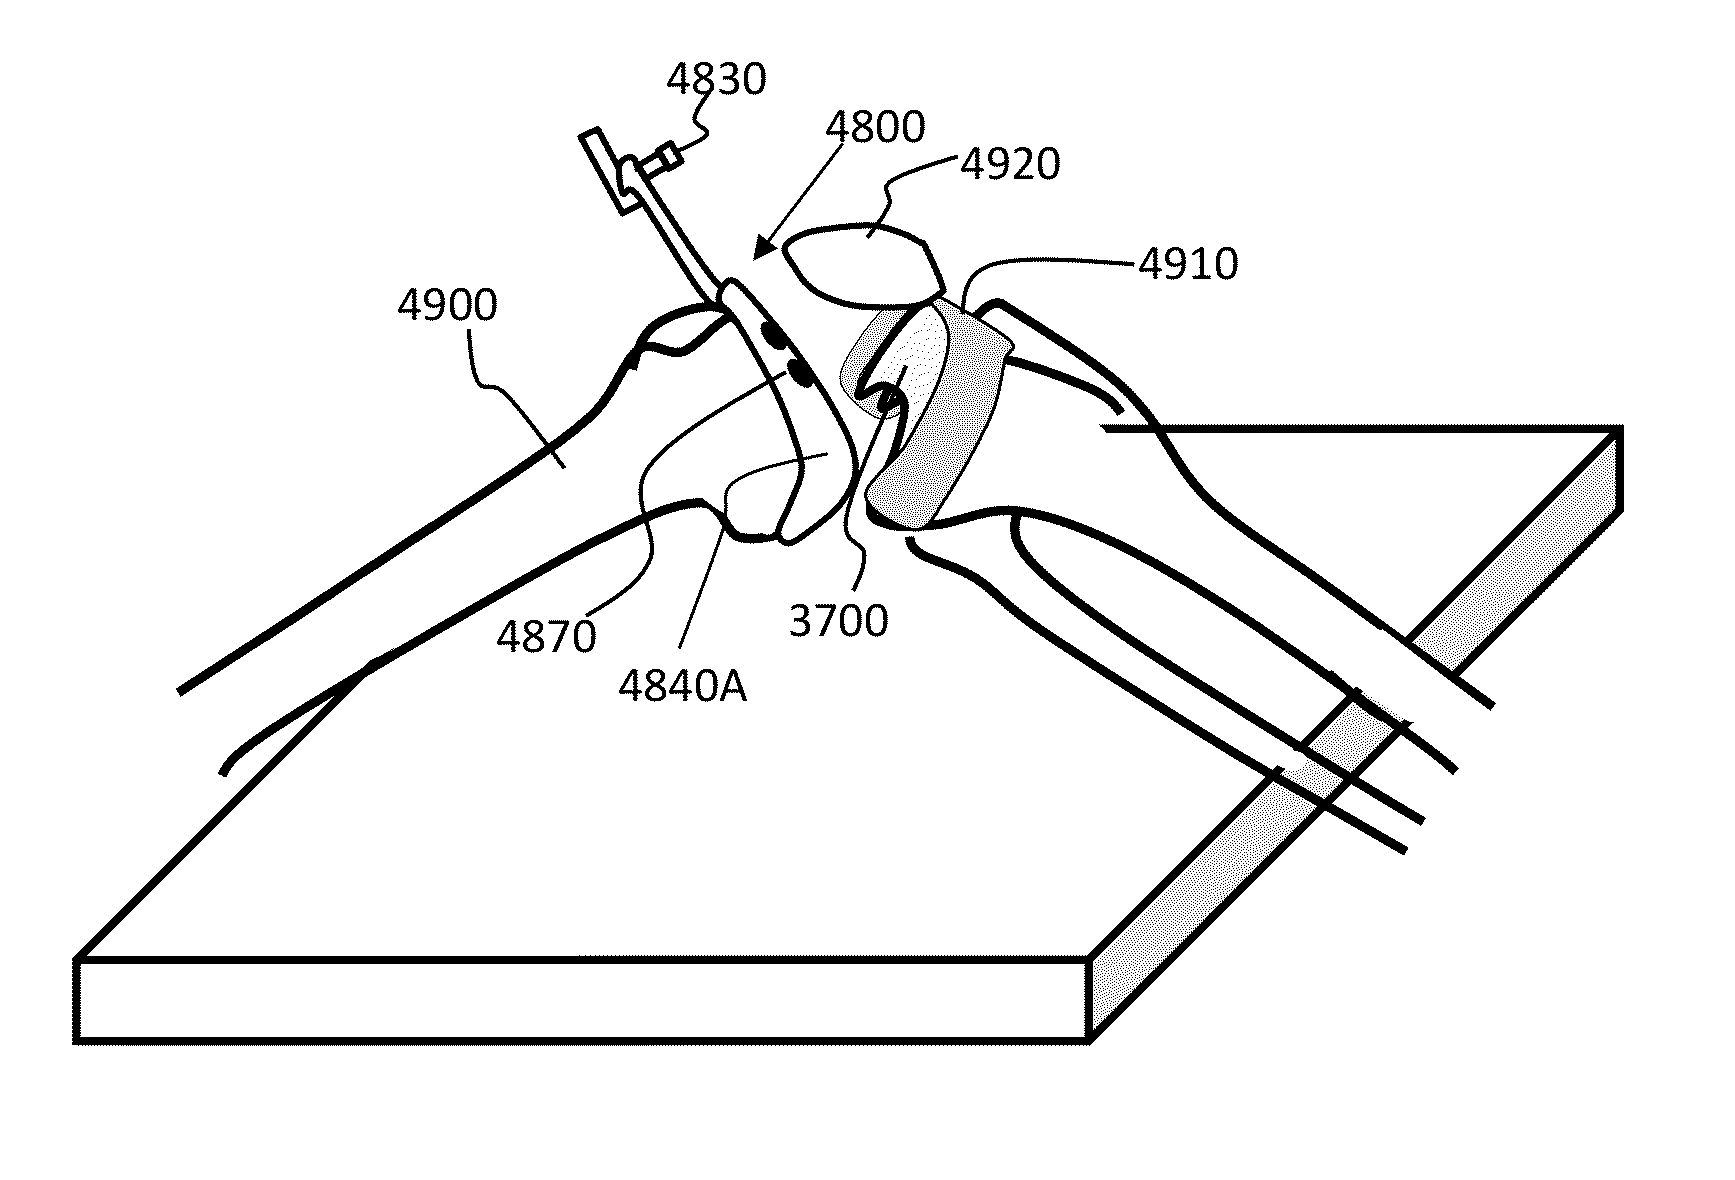 Bone cutting method for alignment relative to a mechanical axis